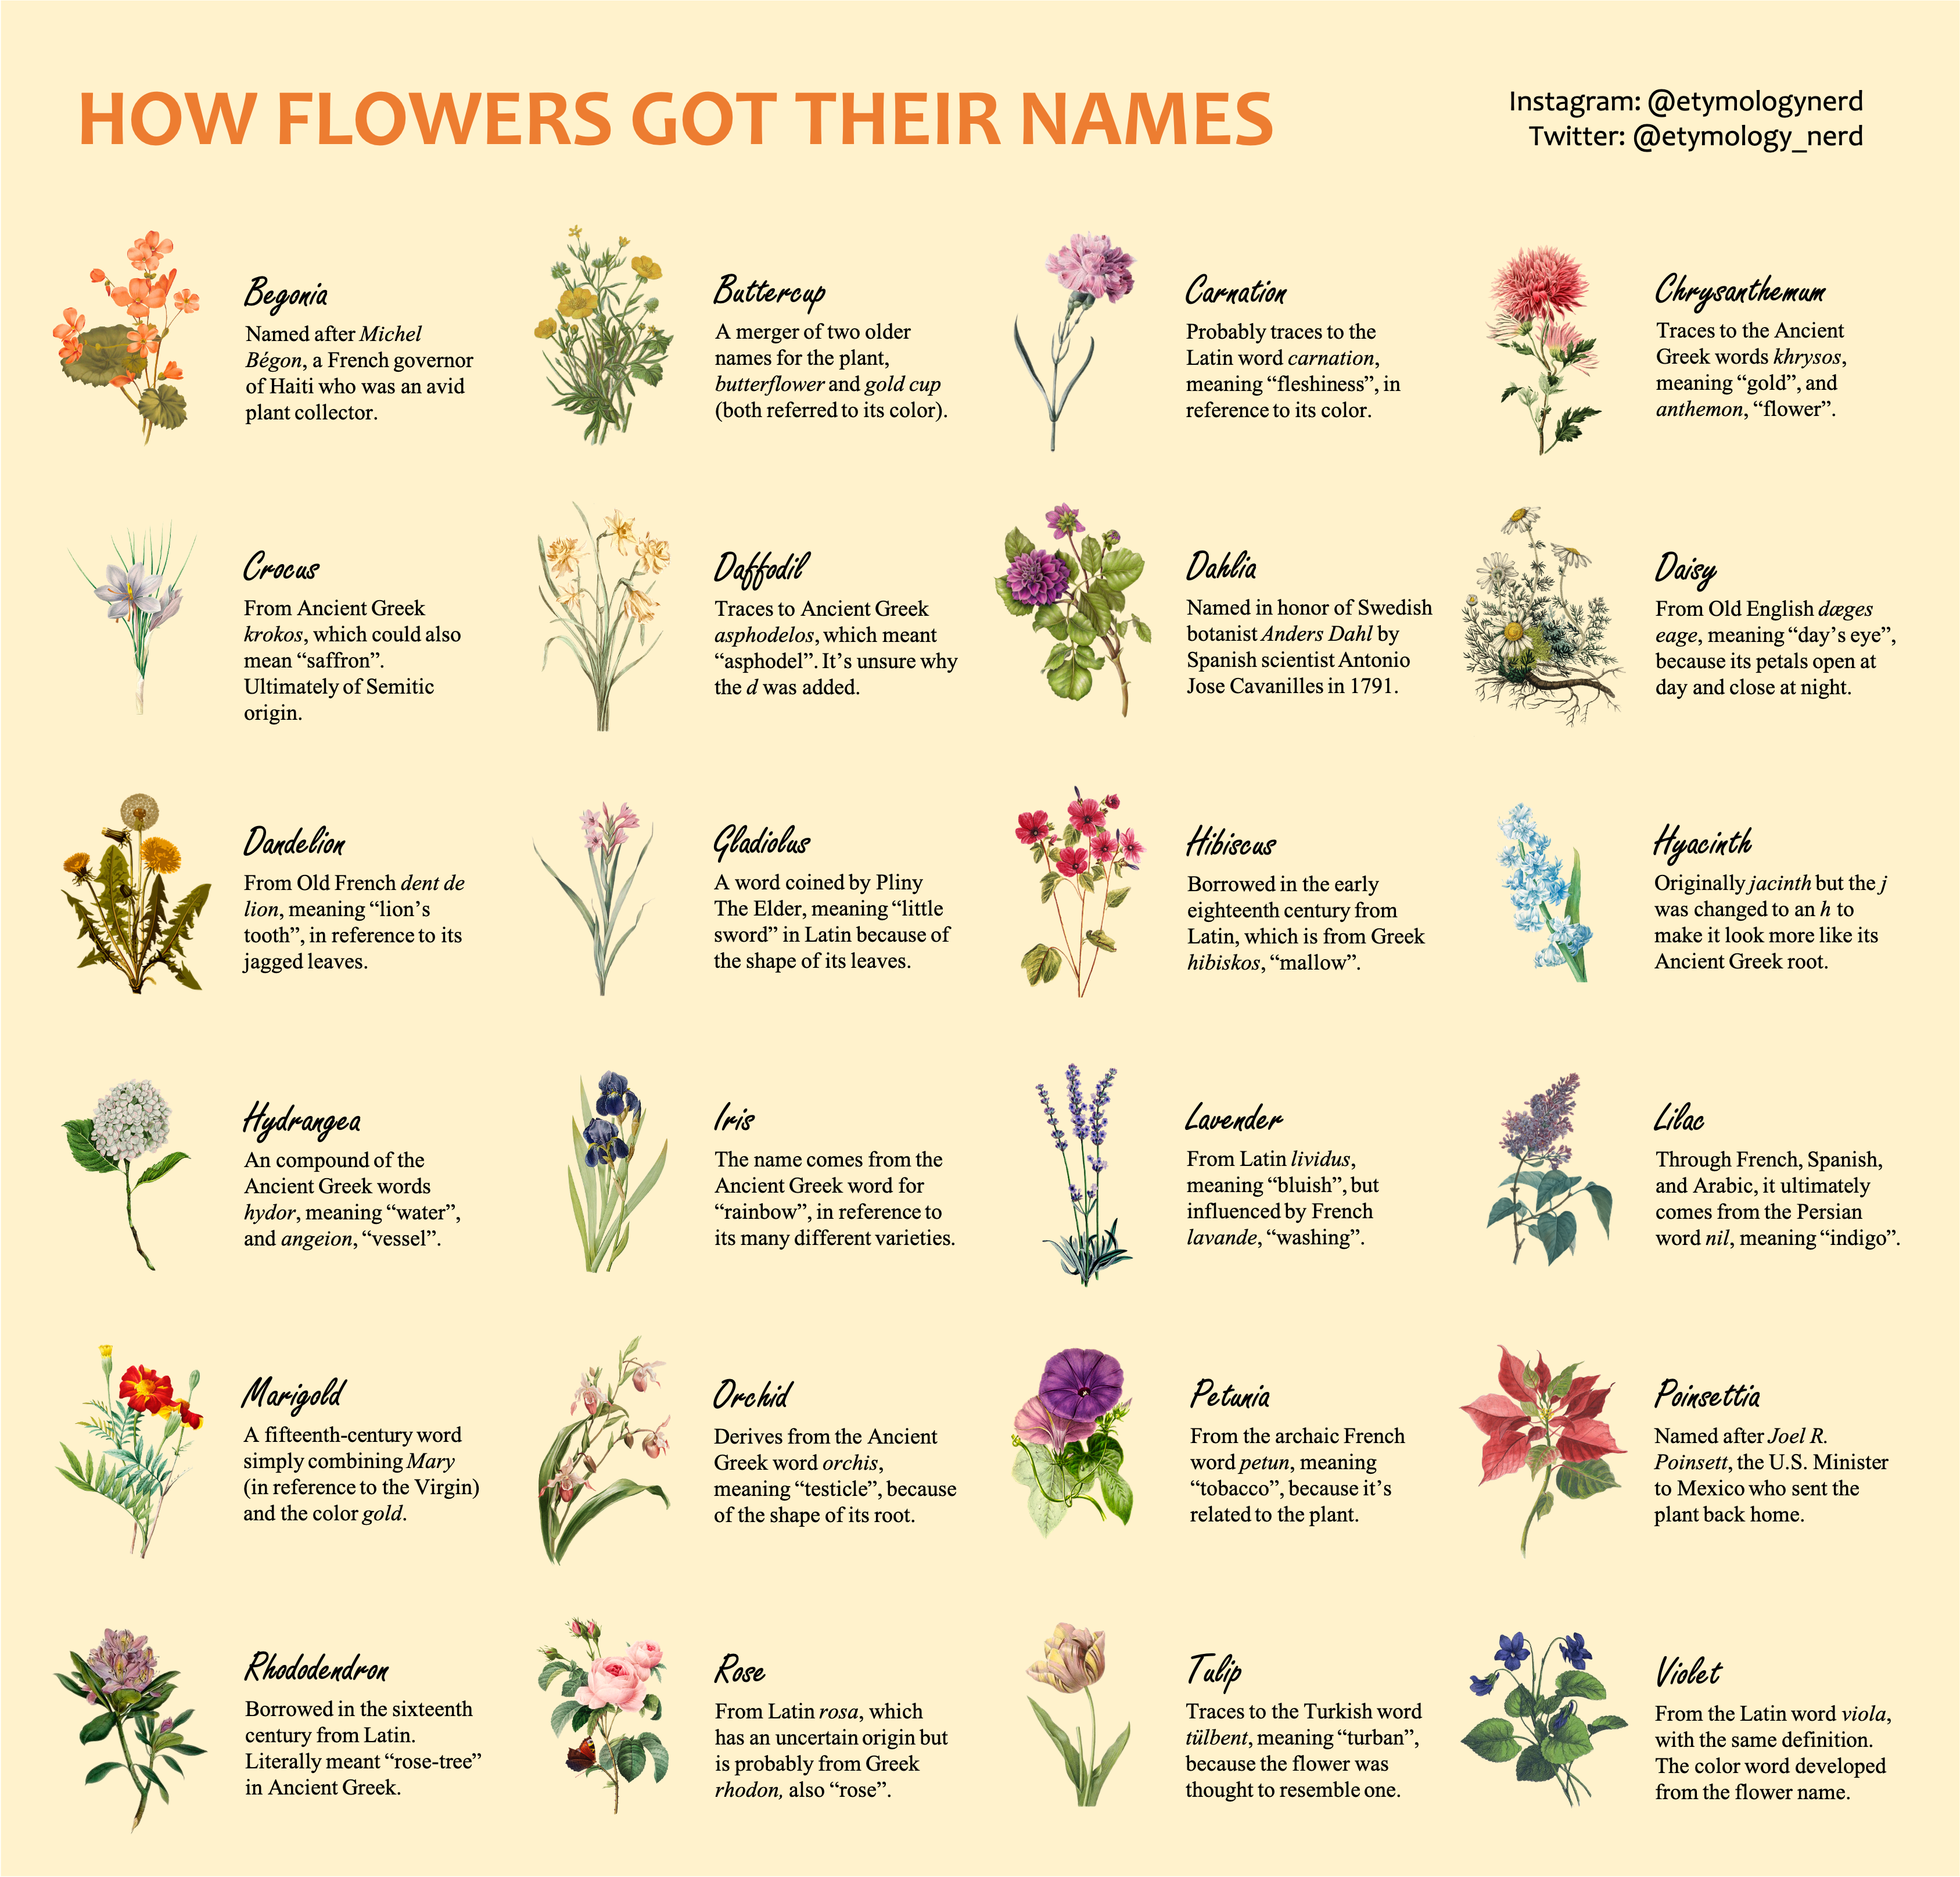 How flowers got their names